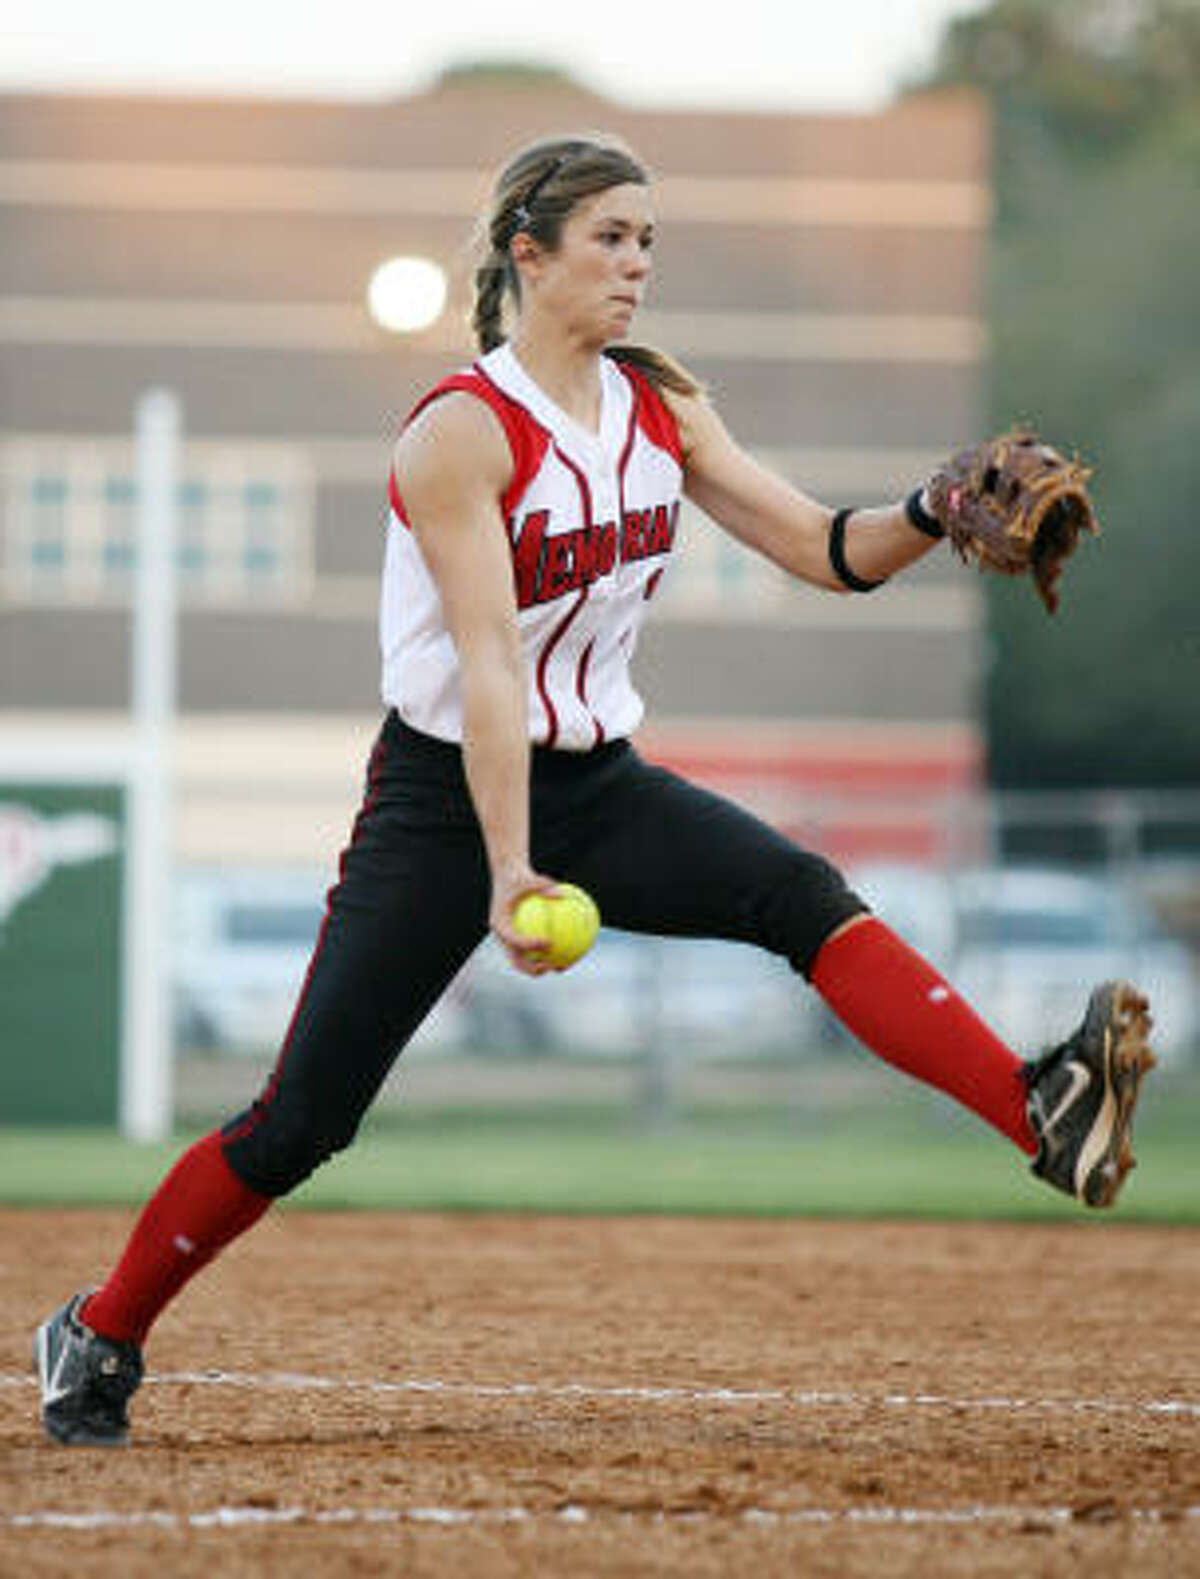 Meghan Slattery , Utility player, Senior, Memorial Slattery can do it all, and has, for the Mustangs. She is the team’s top returning hitter, one of the area’s best fielders (infield and outfield) and was a closer several times the past two seasons.